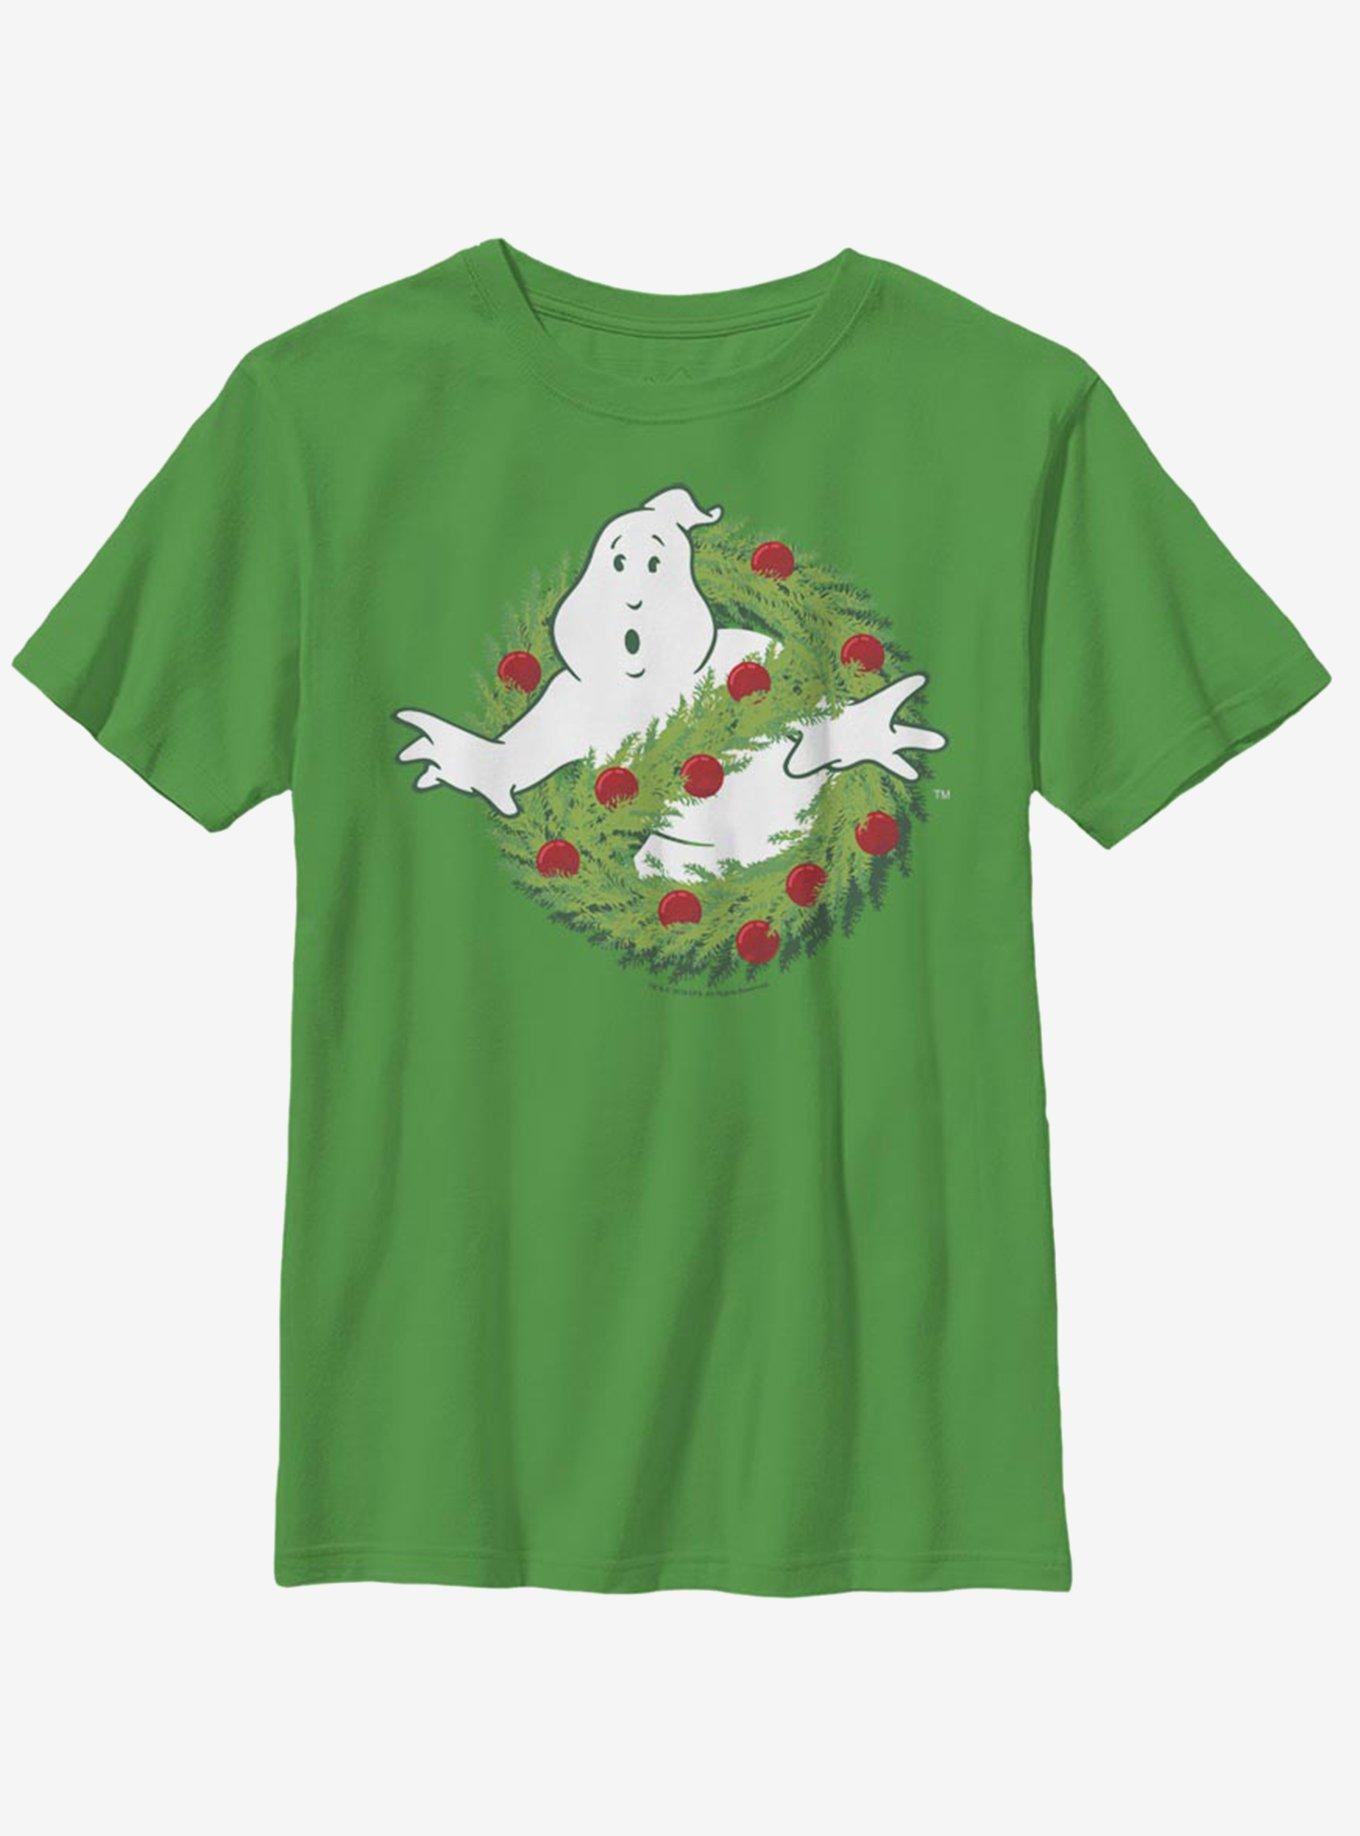 Ghostbusters Holiday Logo Youth T-Shirt, , hi-res